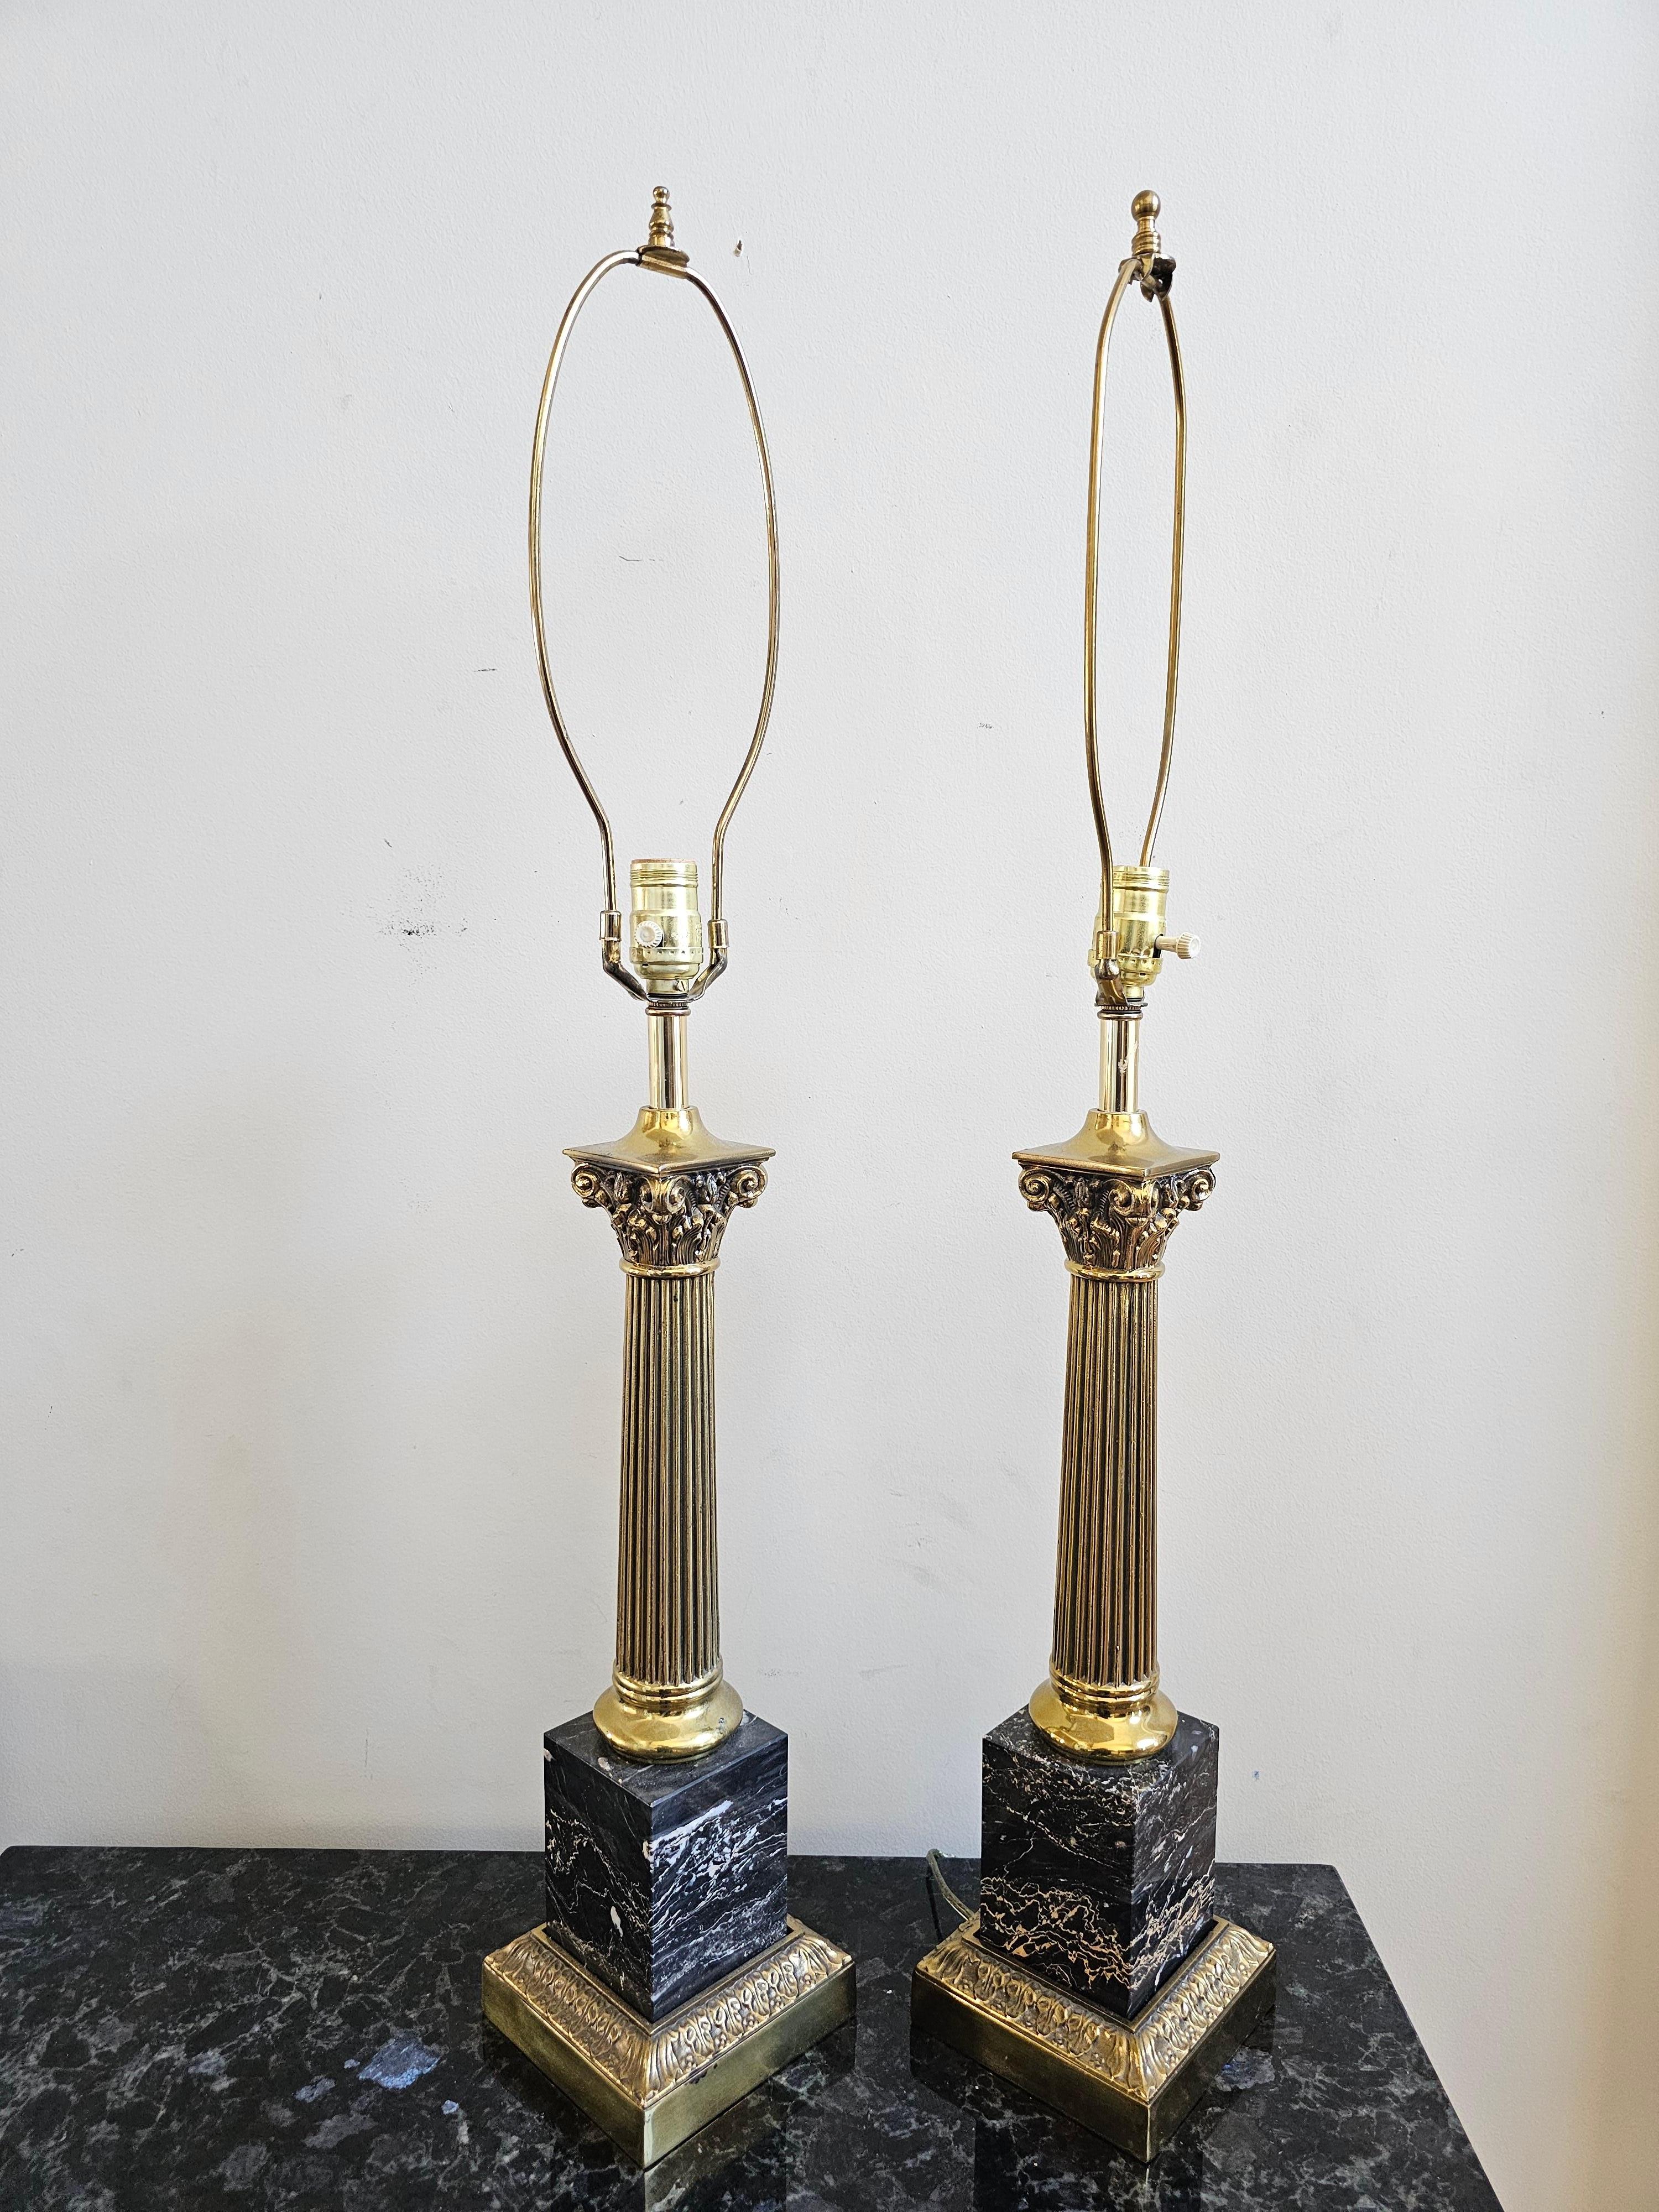 A magnificent Pair Of Continental Marble And Brass Columnar Form Table Lamps. Measures 5.5